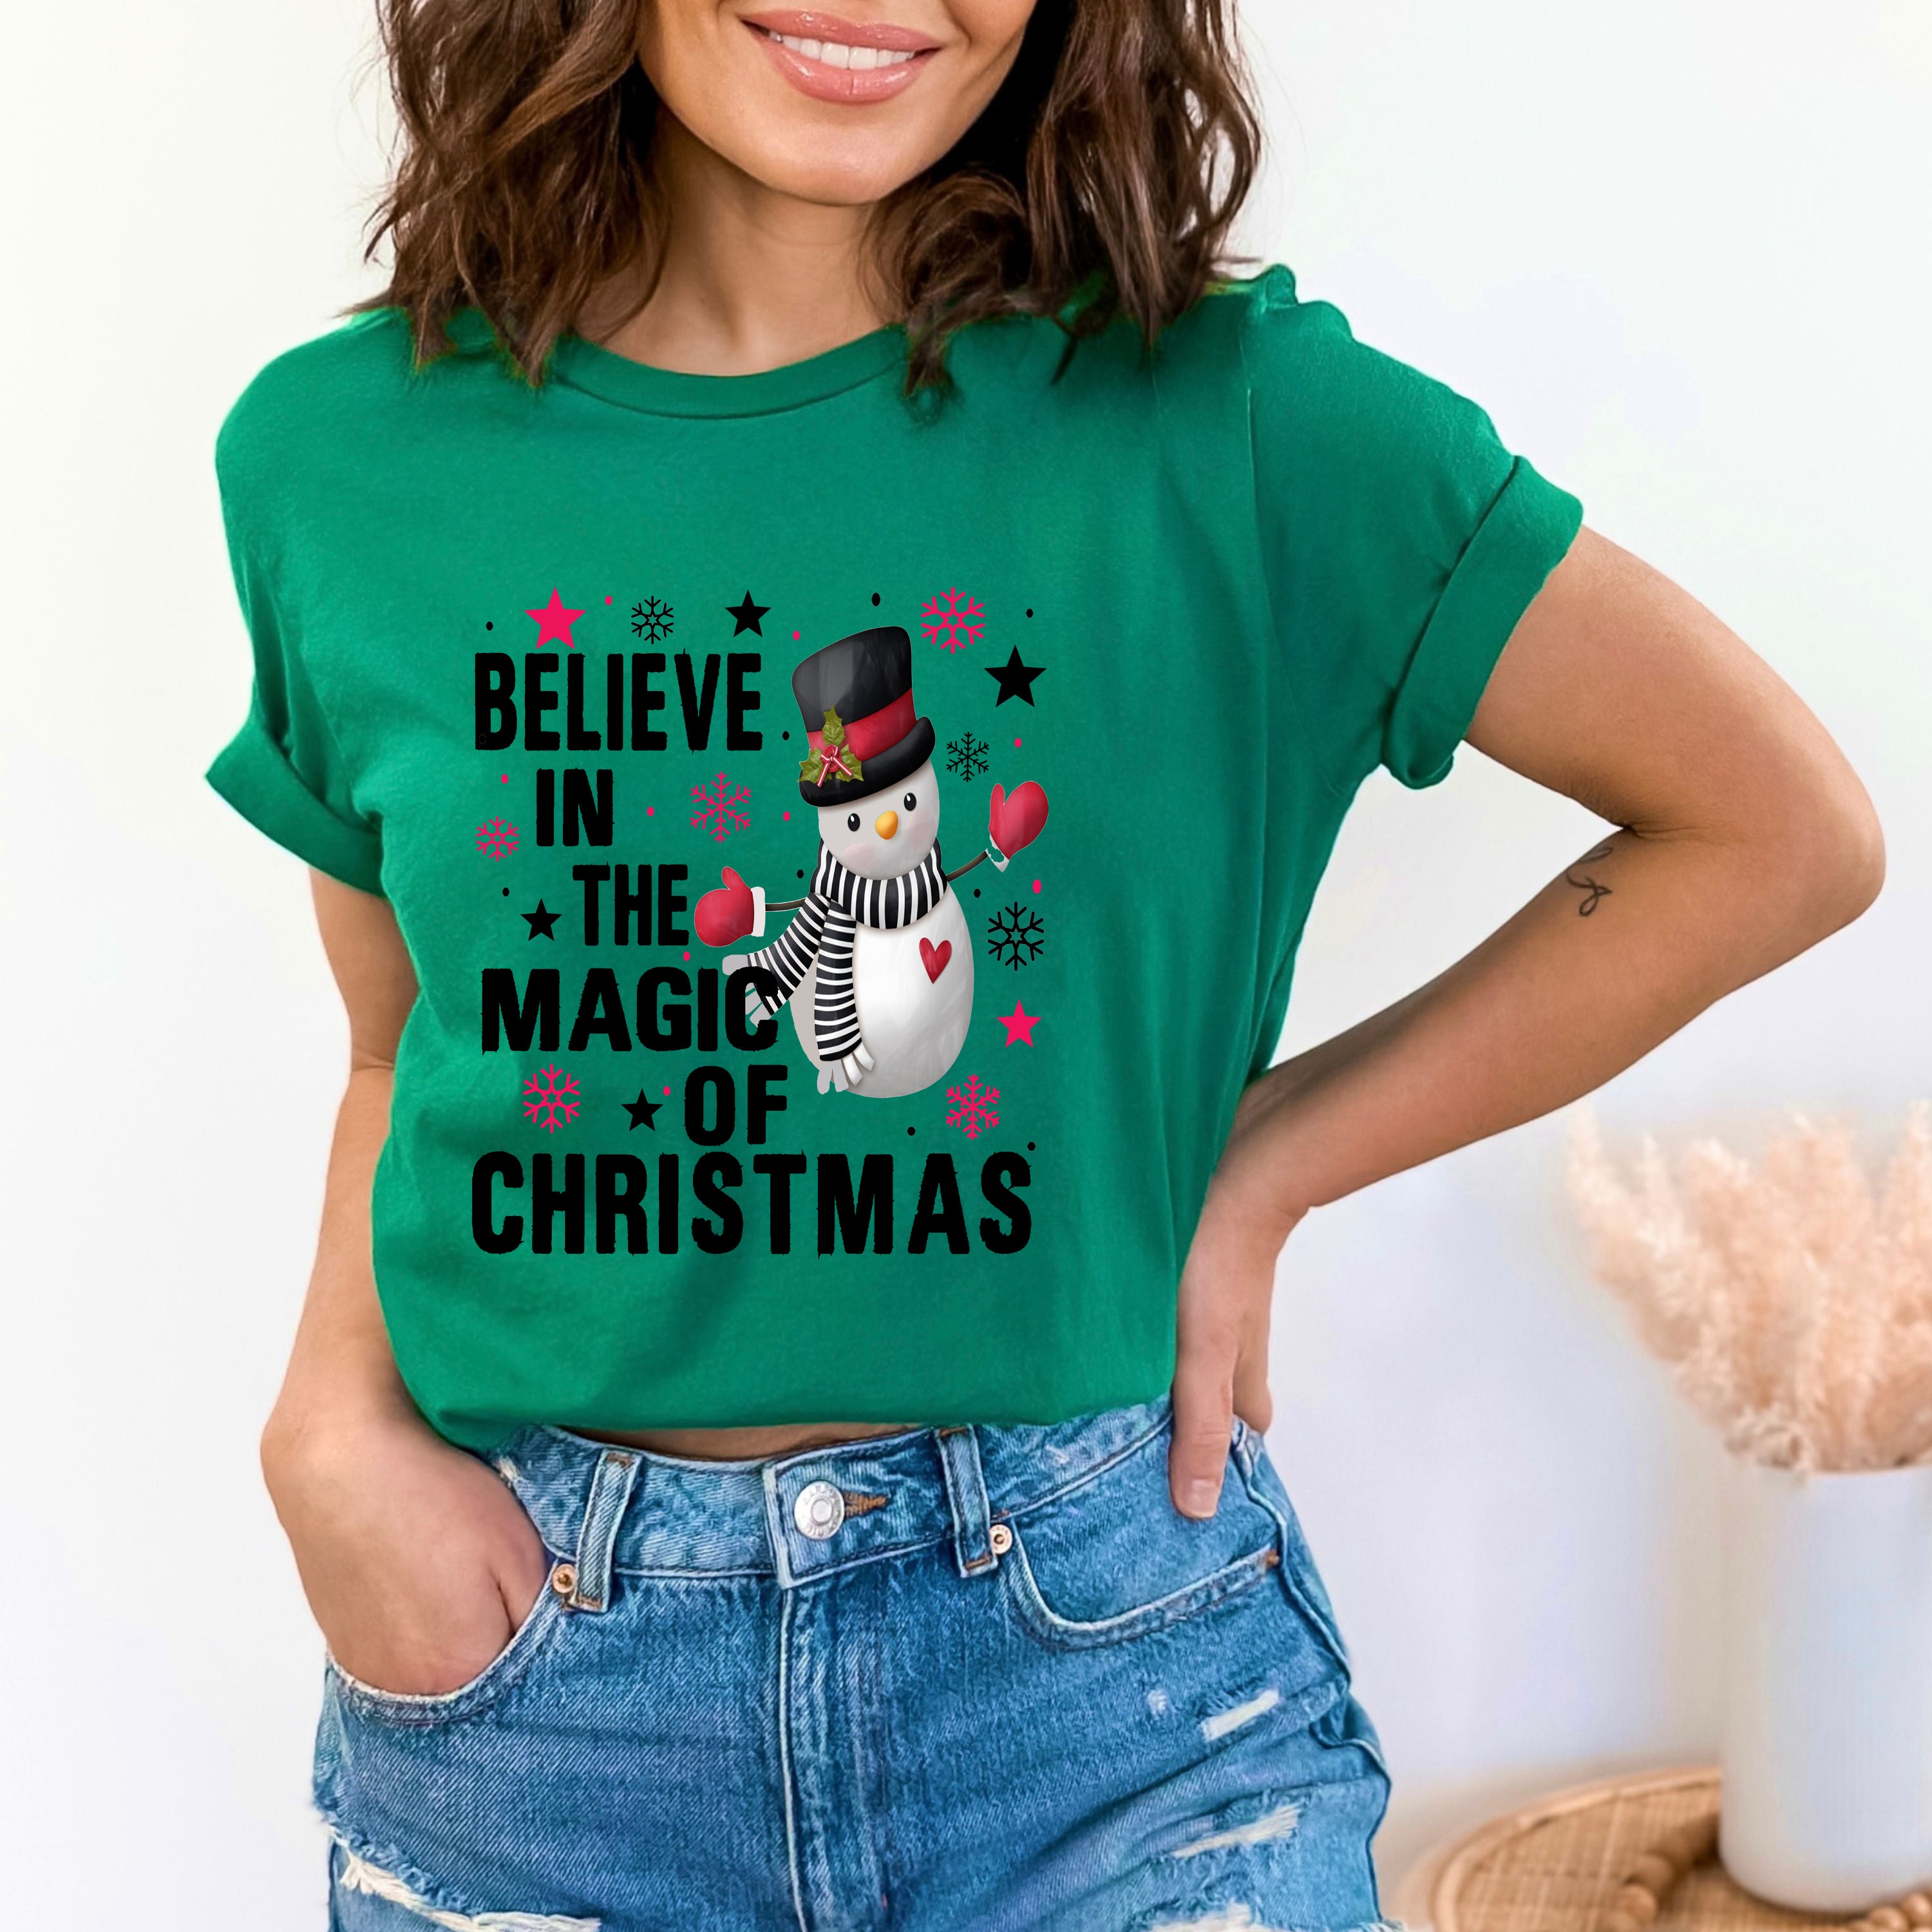 'BELIEVE IN THE MAGIC OF CHRISTMAS''